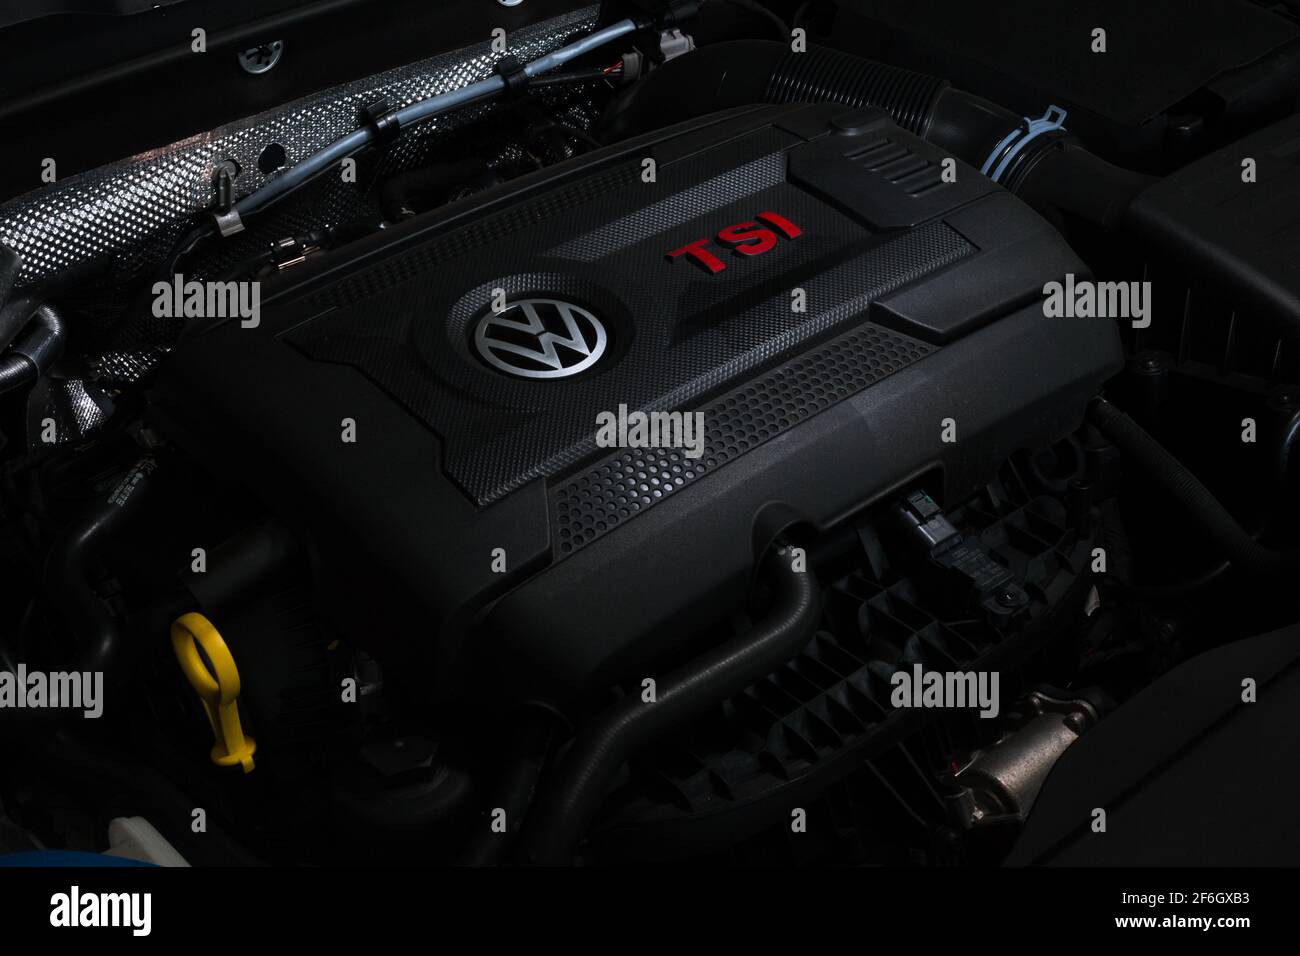 Tsi engine hi-res stock photography and images - Alamy